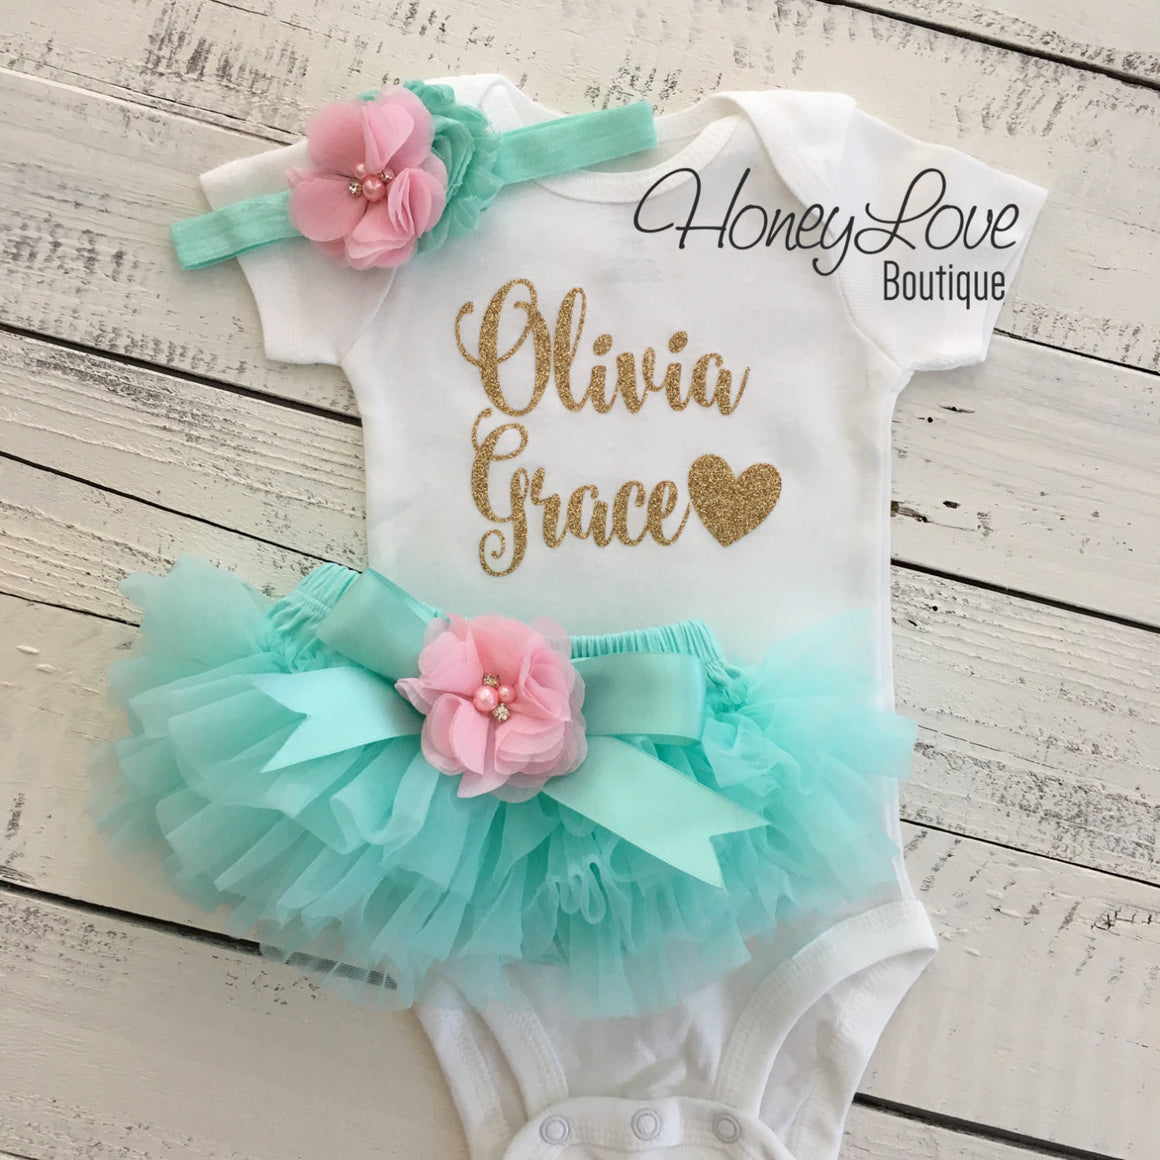 PERSONALIZED Name Outfit - Mint/Aqua and Gold Glitter - Light Pink flower embellished tutu skirt bloomers - HoneyLoveBoutique